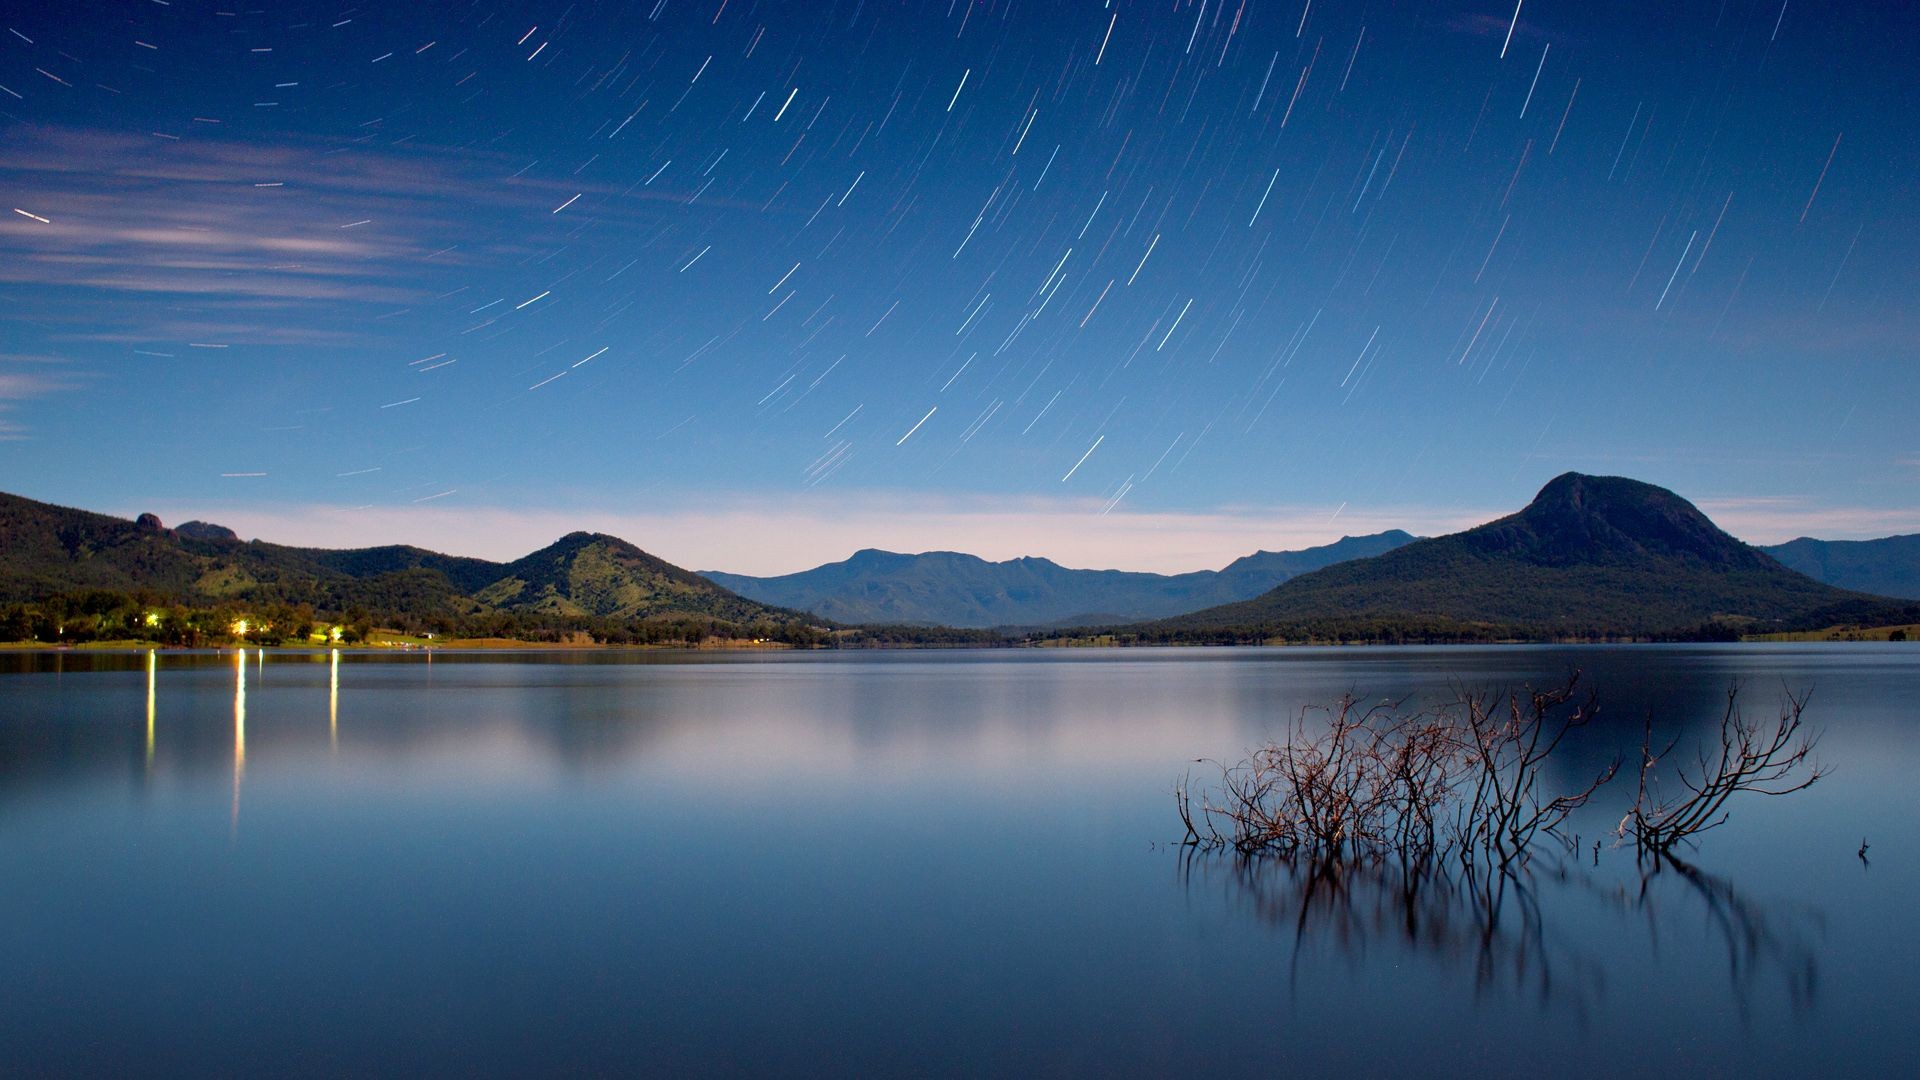 General 1920x1080 reflection long exposure mountains stars landscape nature sky calm waters